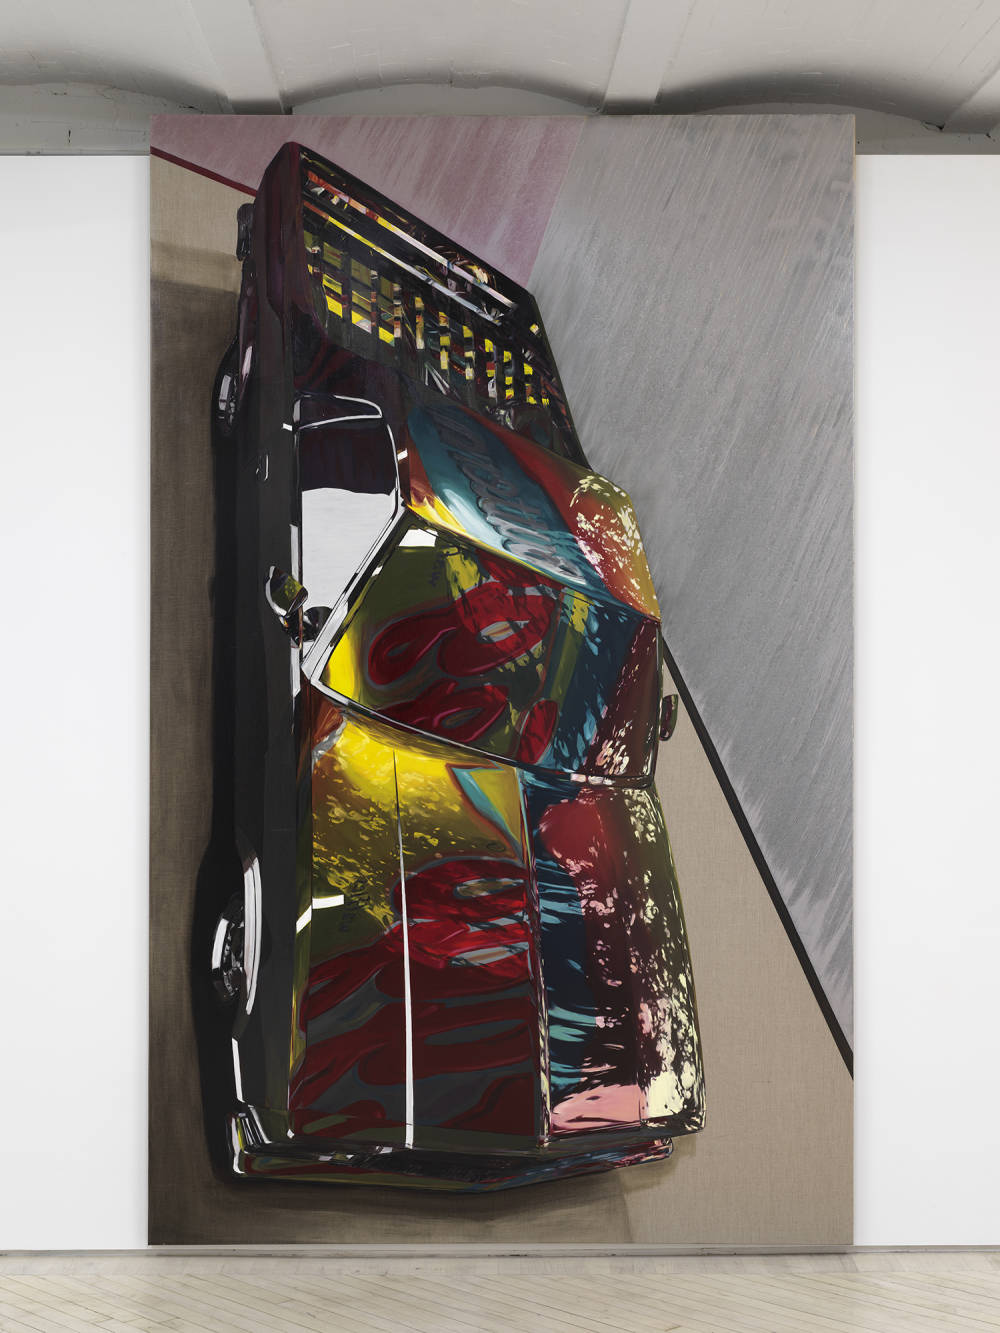 Image of a painting by Tom Holmes that shows a black El Camino car turned vertical that almost touches the ceiling. In the paint of the El Camino you can see a faint reflection of an Eggo waffles box.